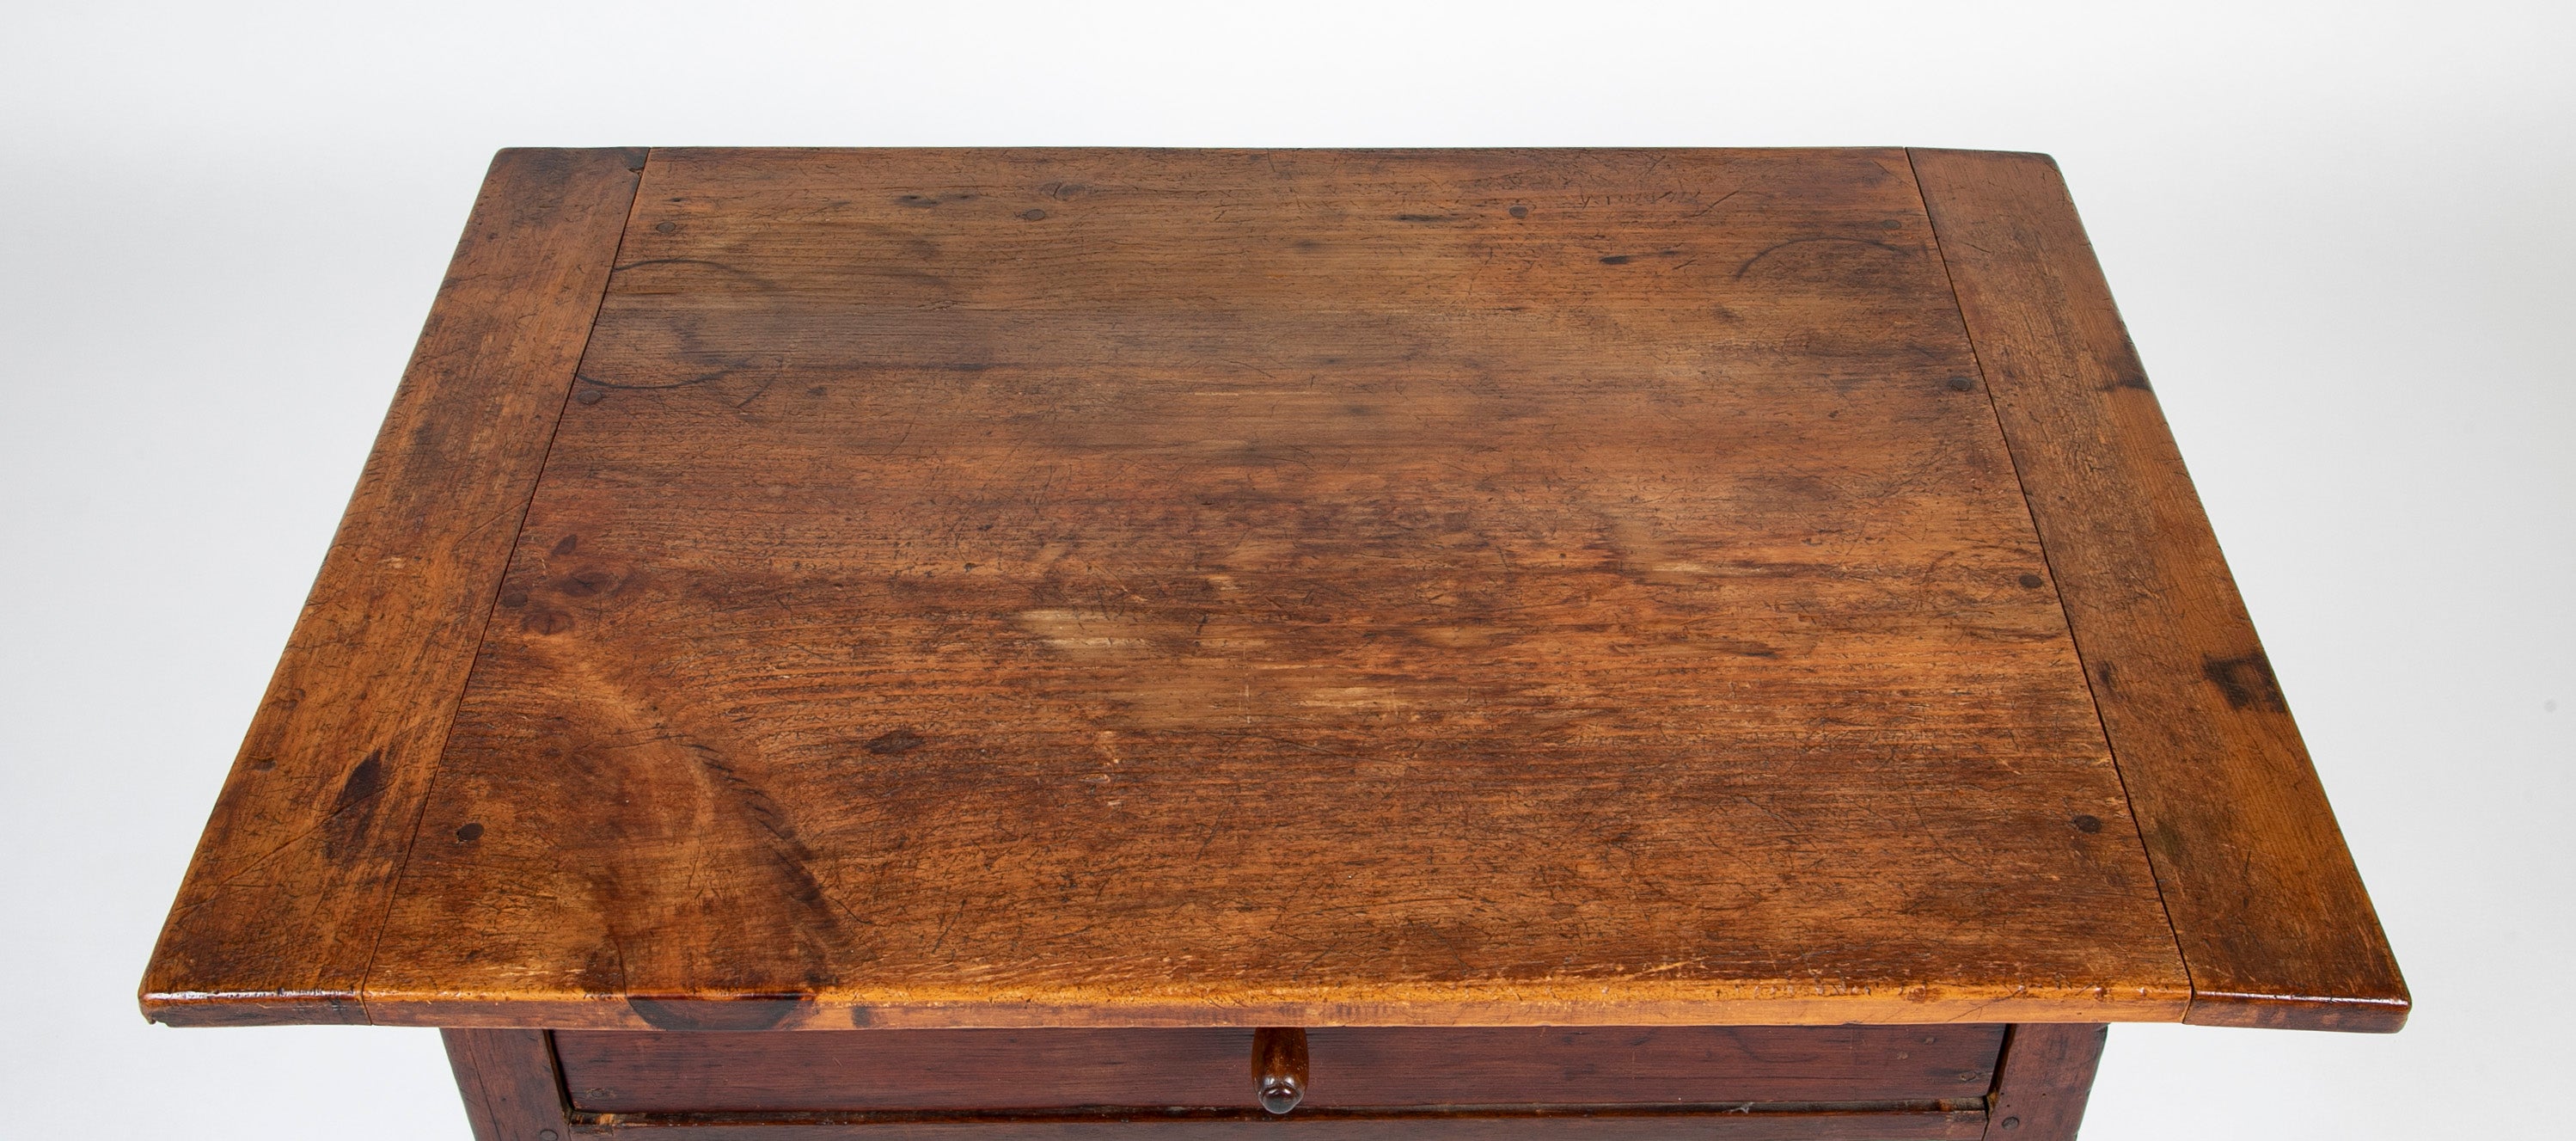 Early 18th Century Scrubbed Pine Top Tavern Table with Old Stain Base